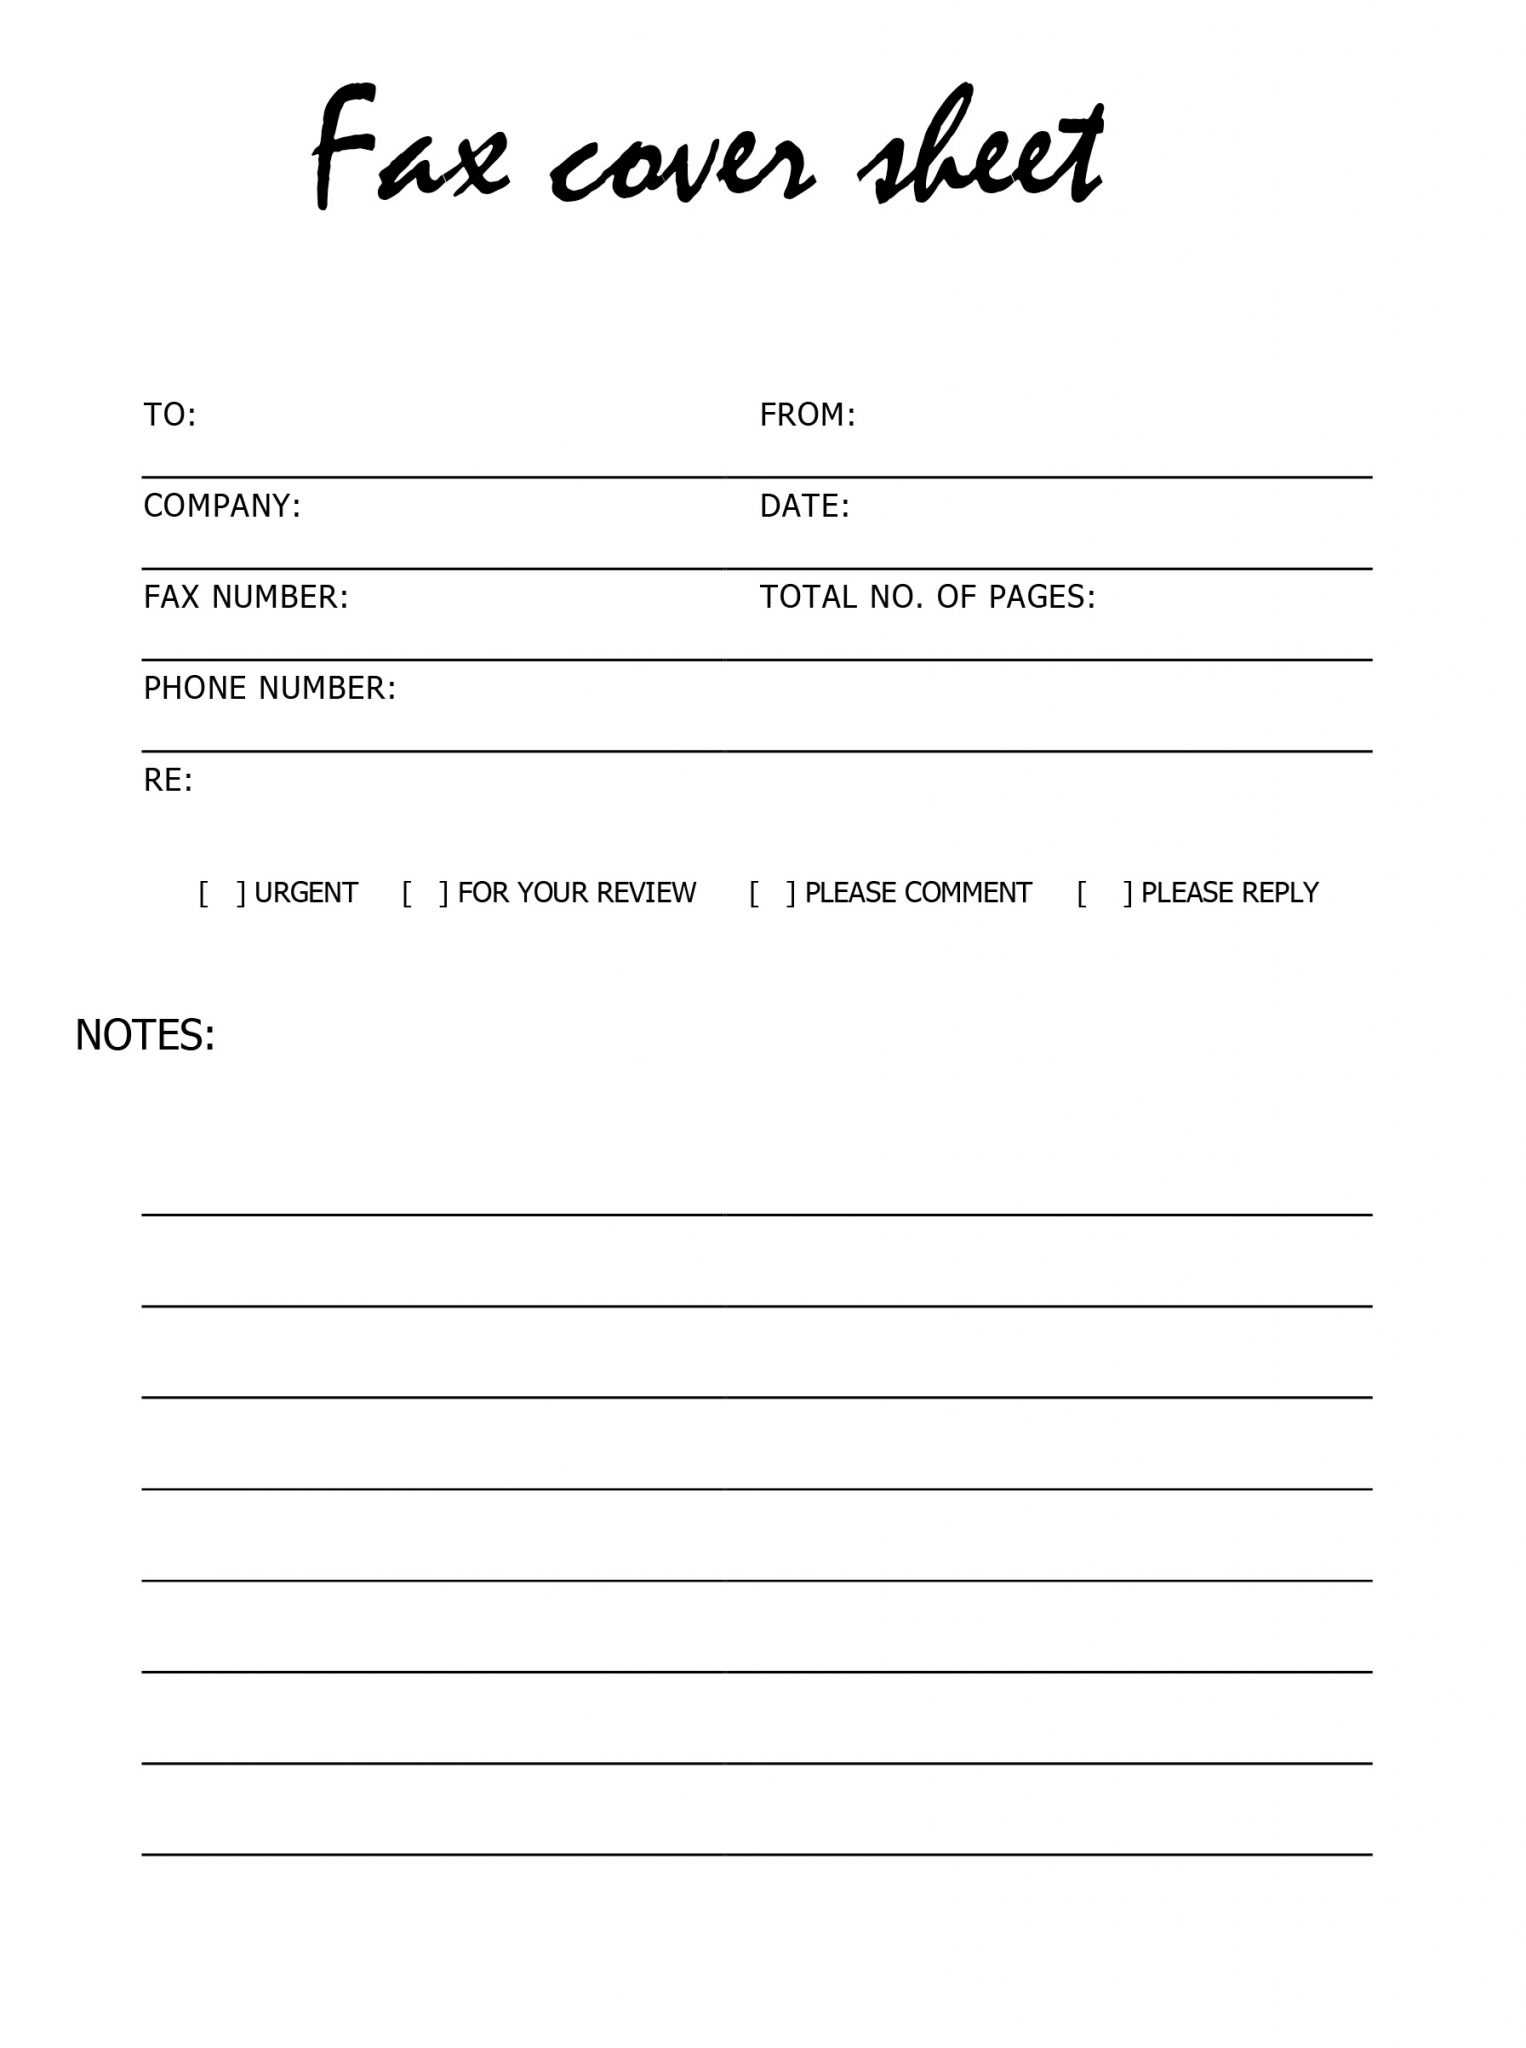 fax cover sheet download free pdf